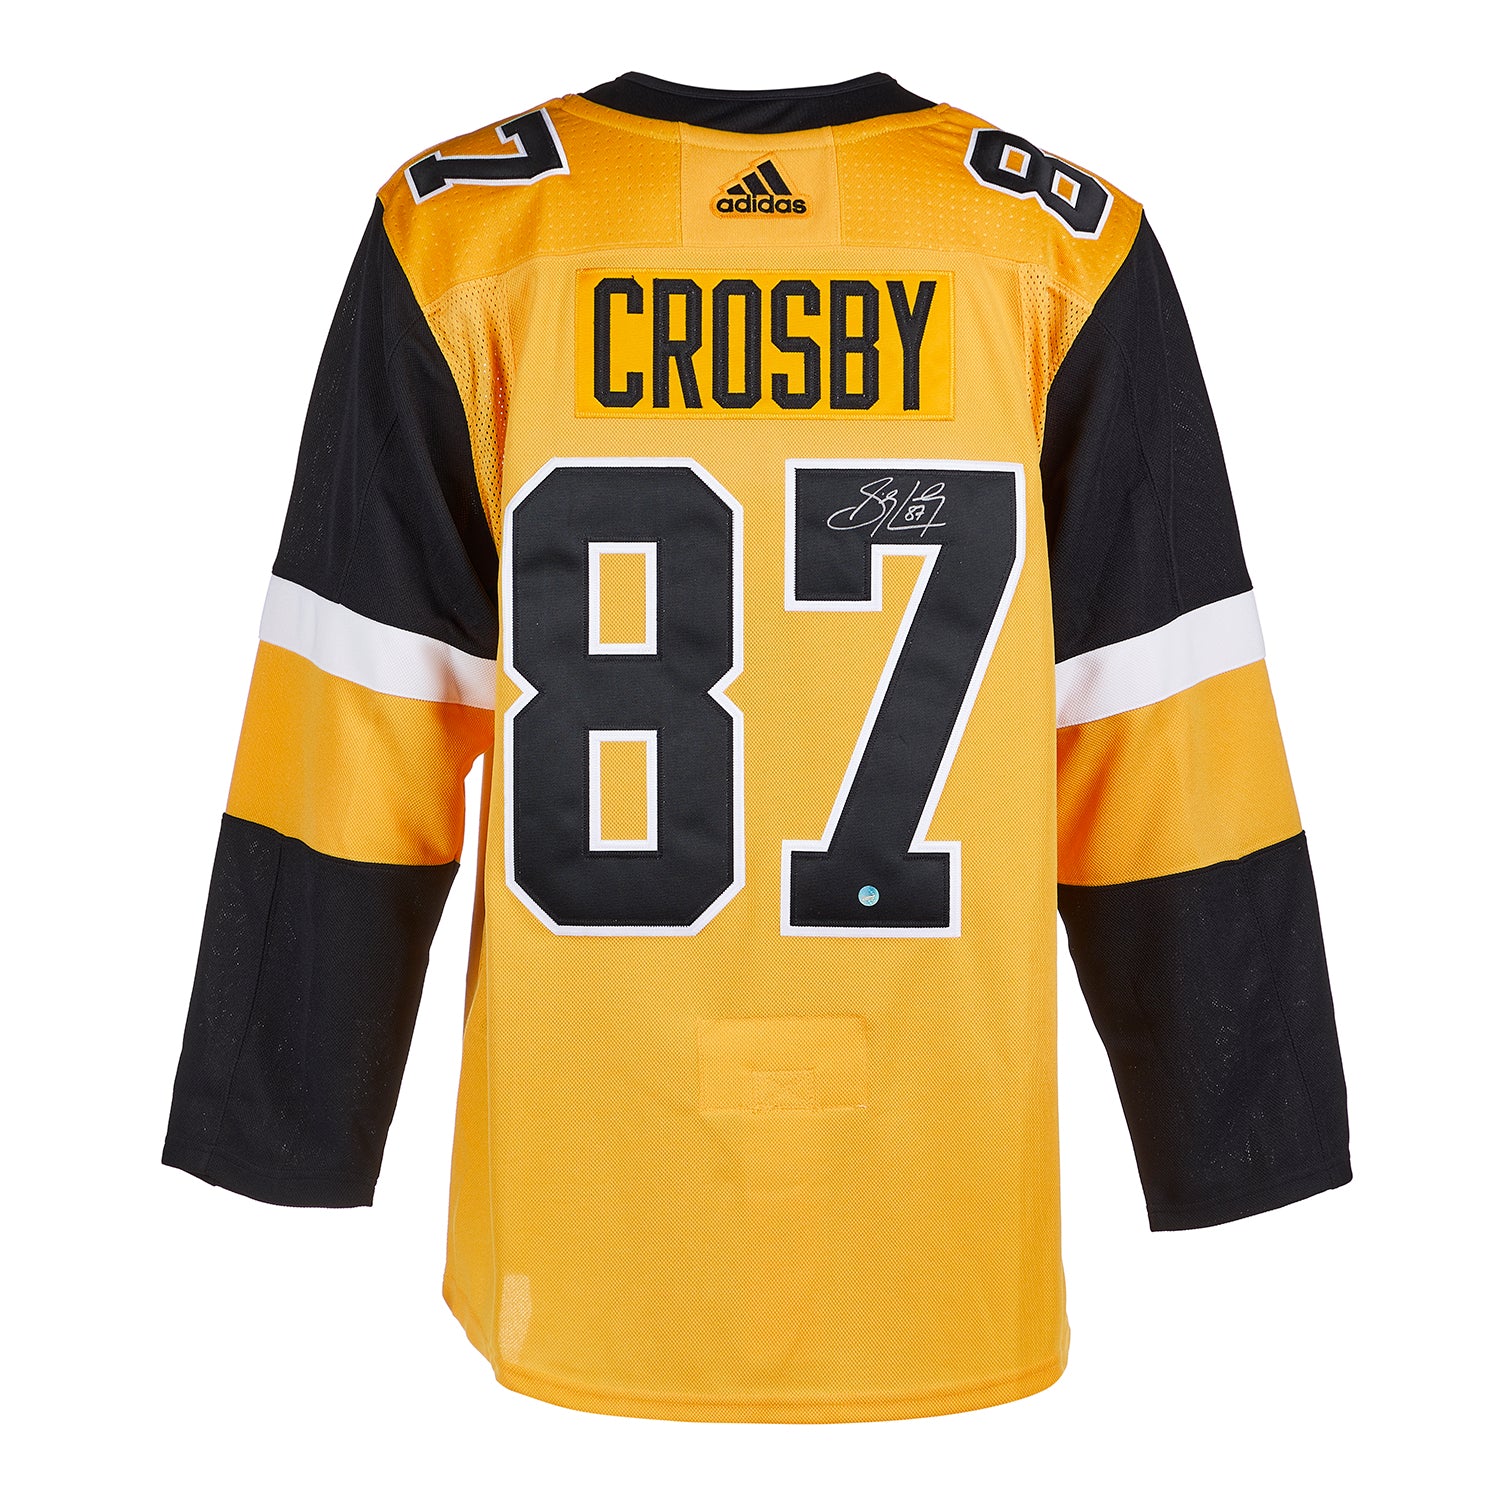 Sidney Crosby Signed Jersey Pittsburgh Penguins Black Adidas - NHL Auctions